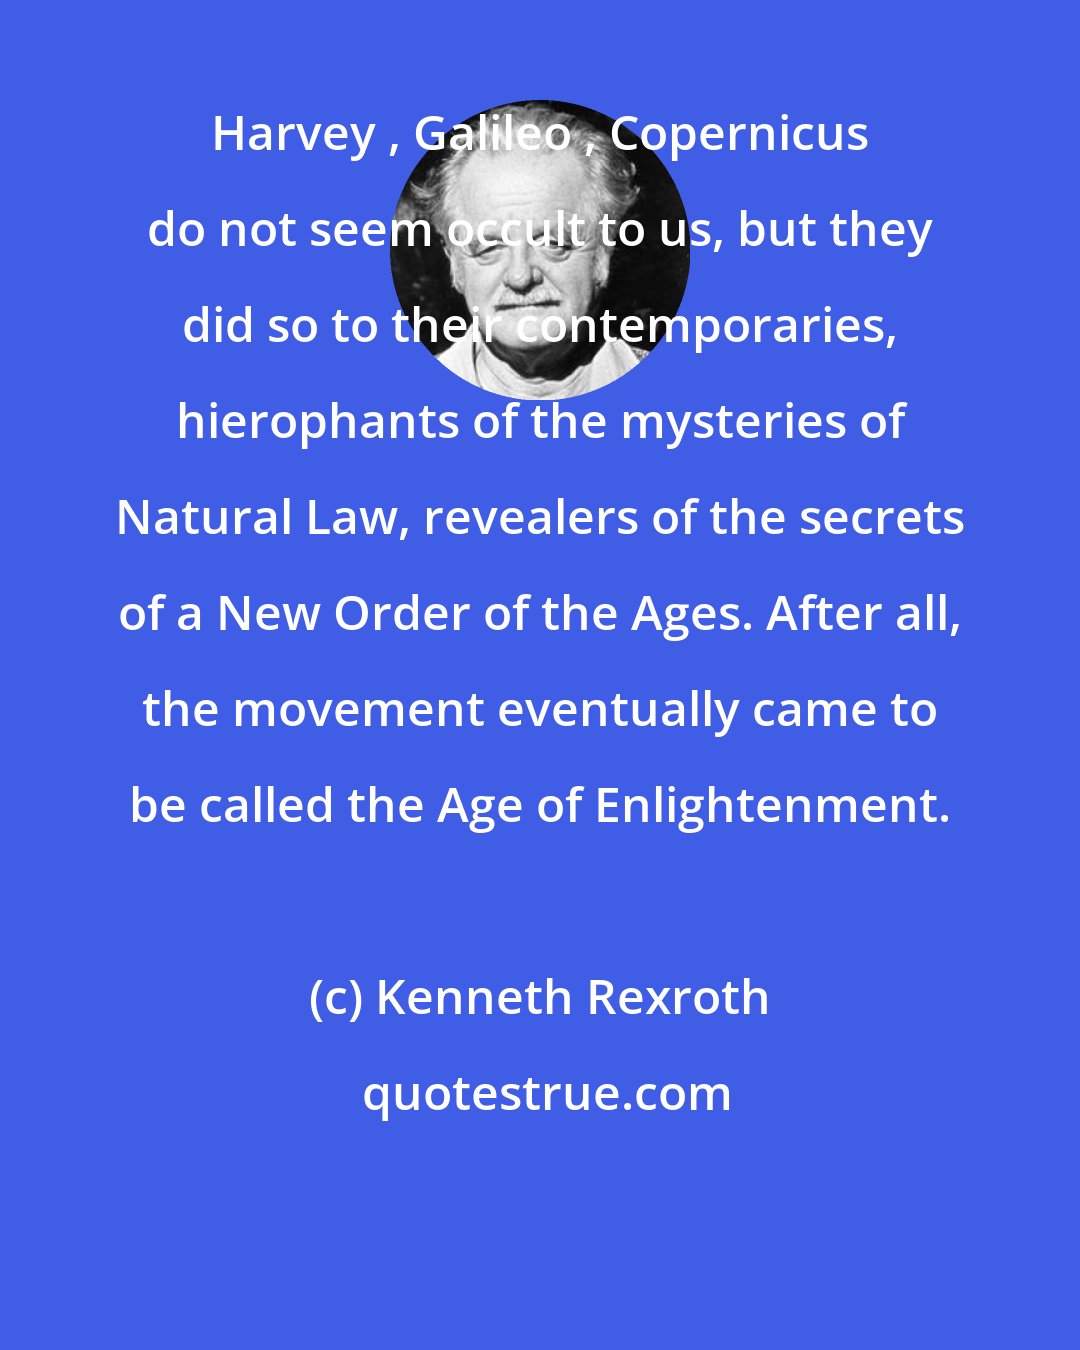 Kenneth Rexroth: Harvey , Galileo , Copernicus do not seem occult to us, but they did so to their contemporaries, hierophants of the mysteries of Natural Law, revealers of the secrets of a New Order of the Ages. After all, the movement eventually came to be called the Age of Enlightenment.